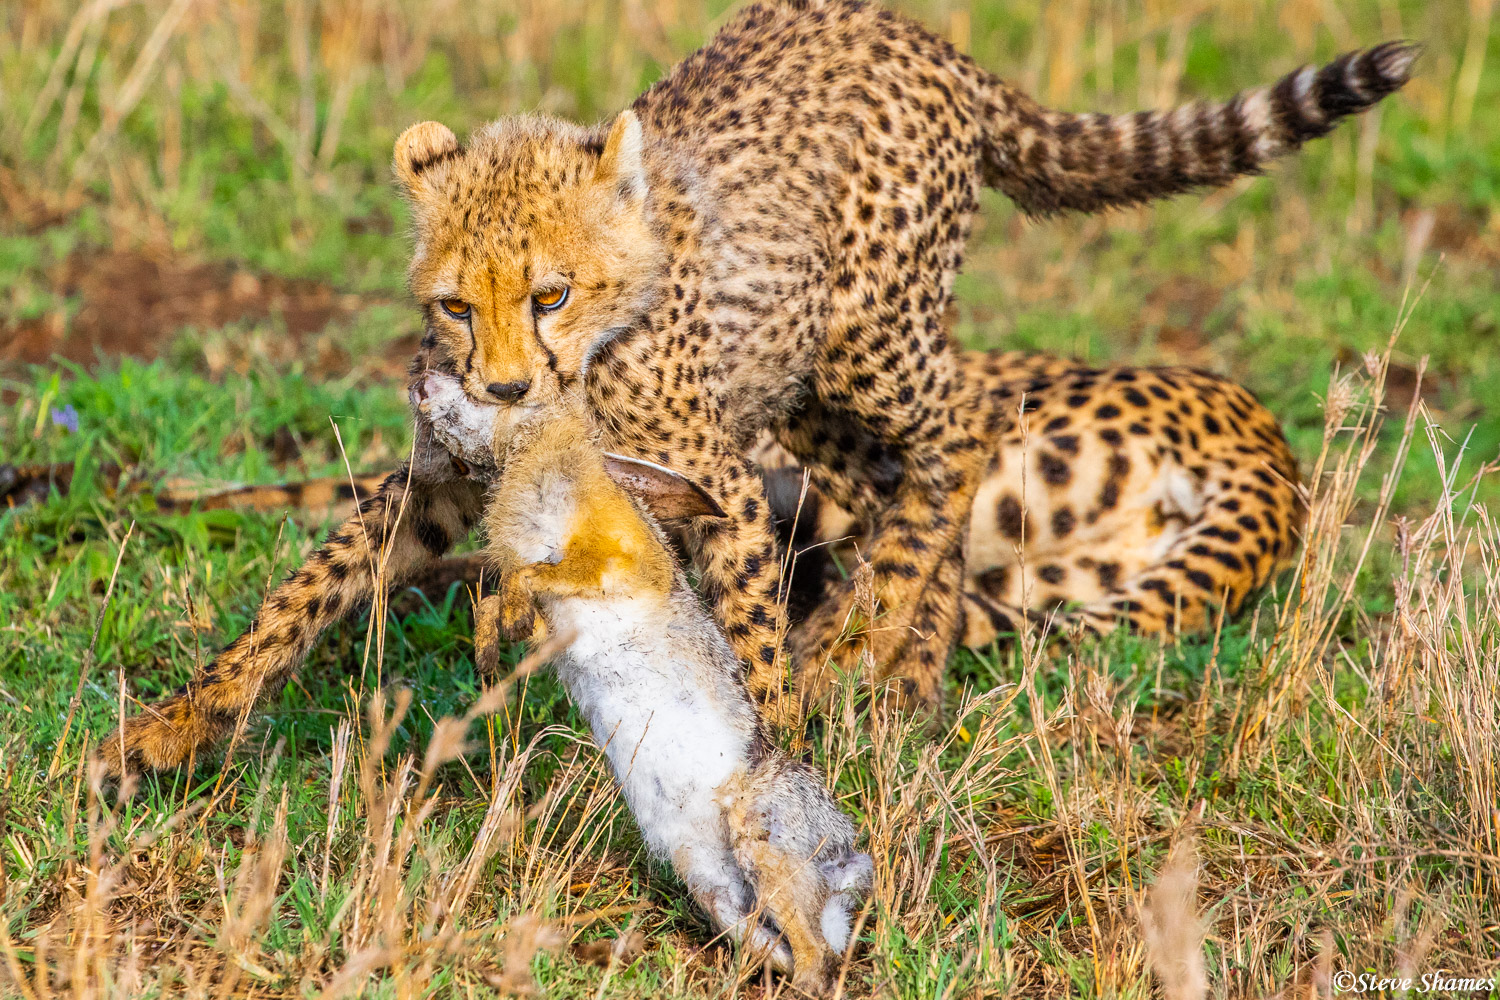 The cheetah cub, as cats like to do, plays with the rabbit kill for a while.